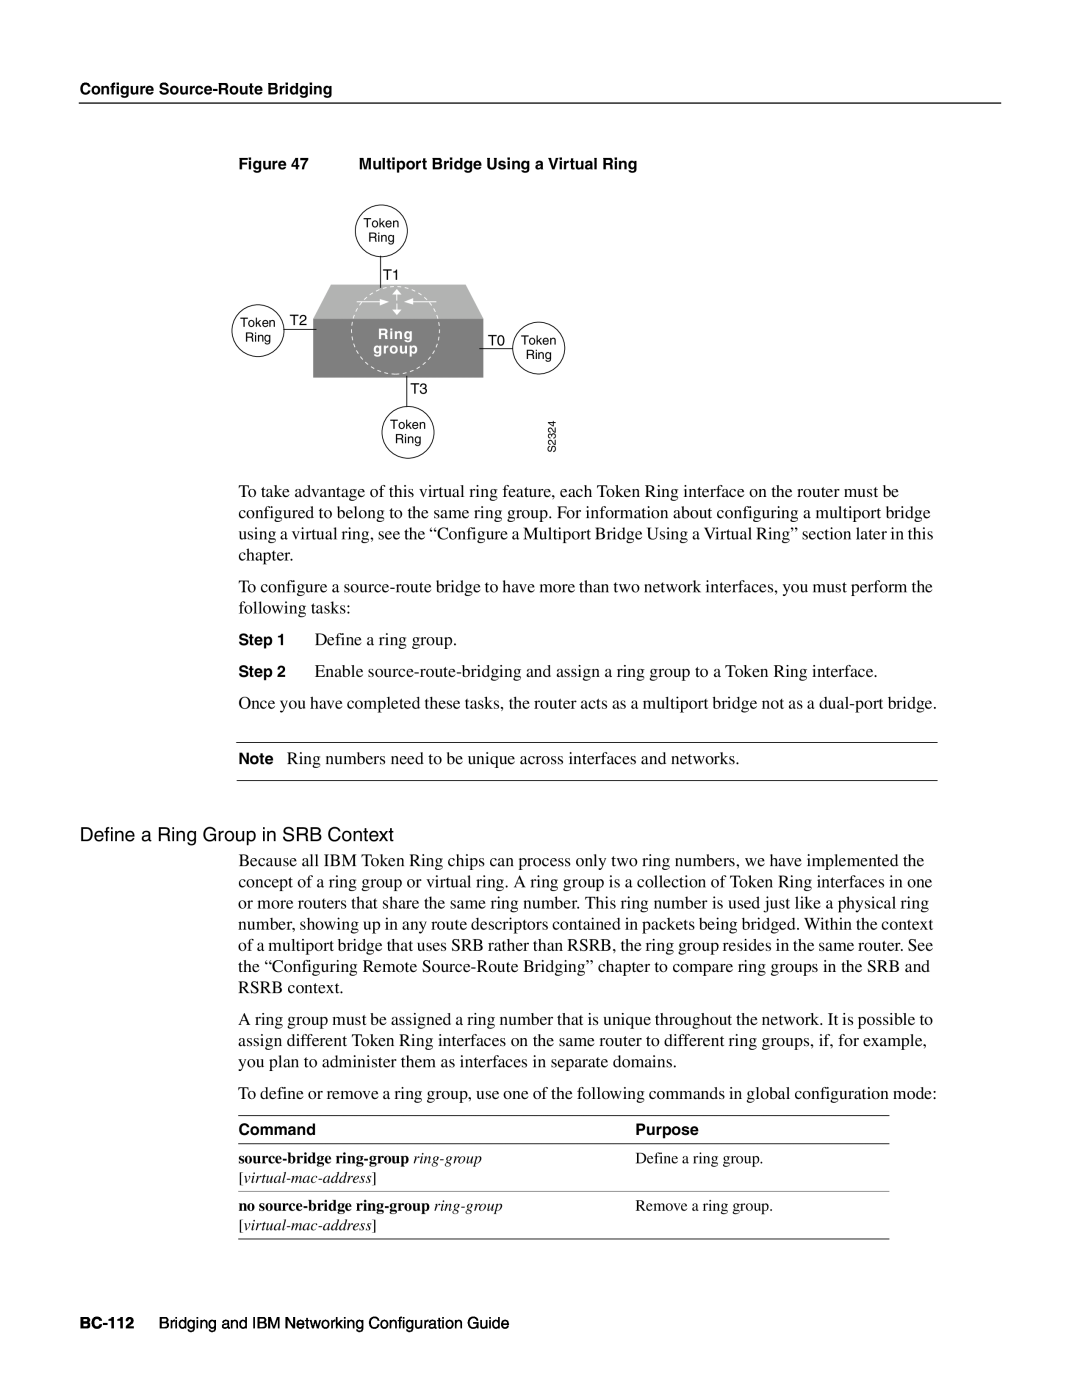 Cisco Systems BC-109 manual Define a Ring Group in SRB Context 